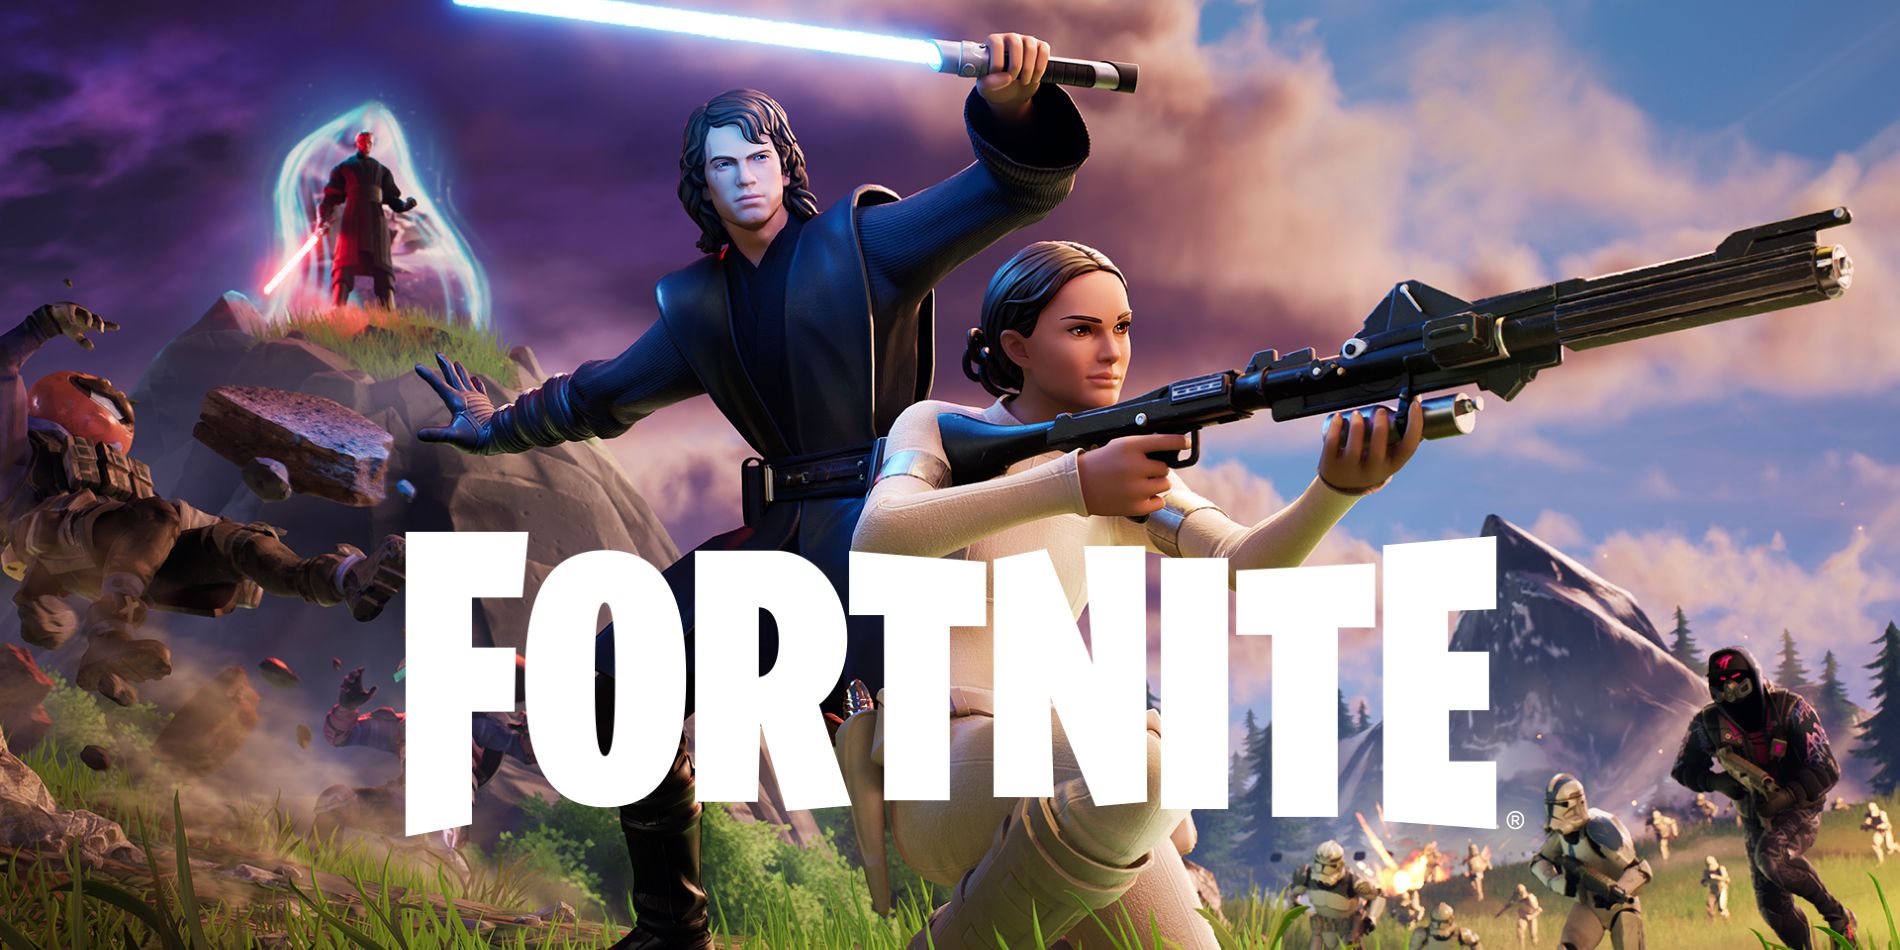 Fortnite Find the Force Discord Quest - Fortnite Guide - IGN